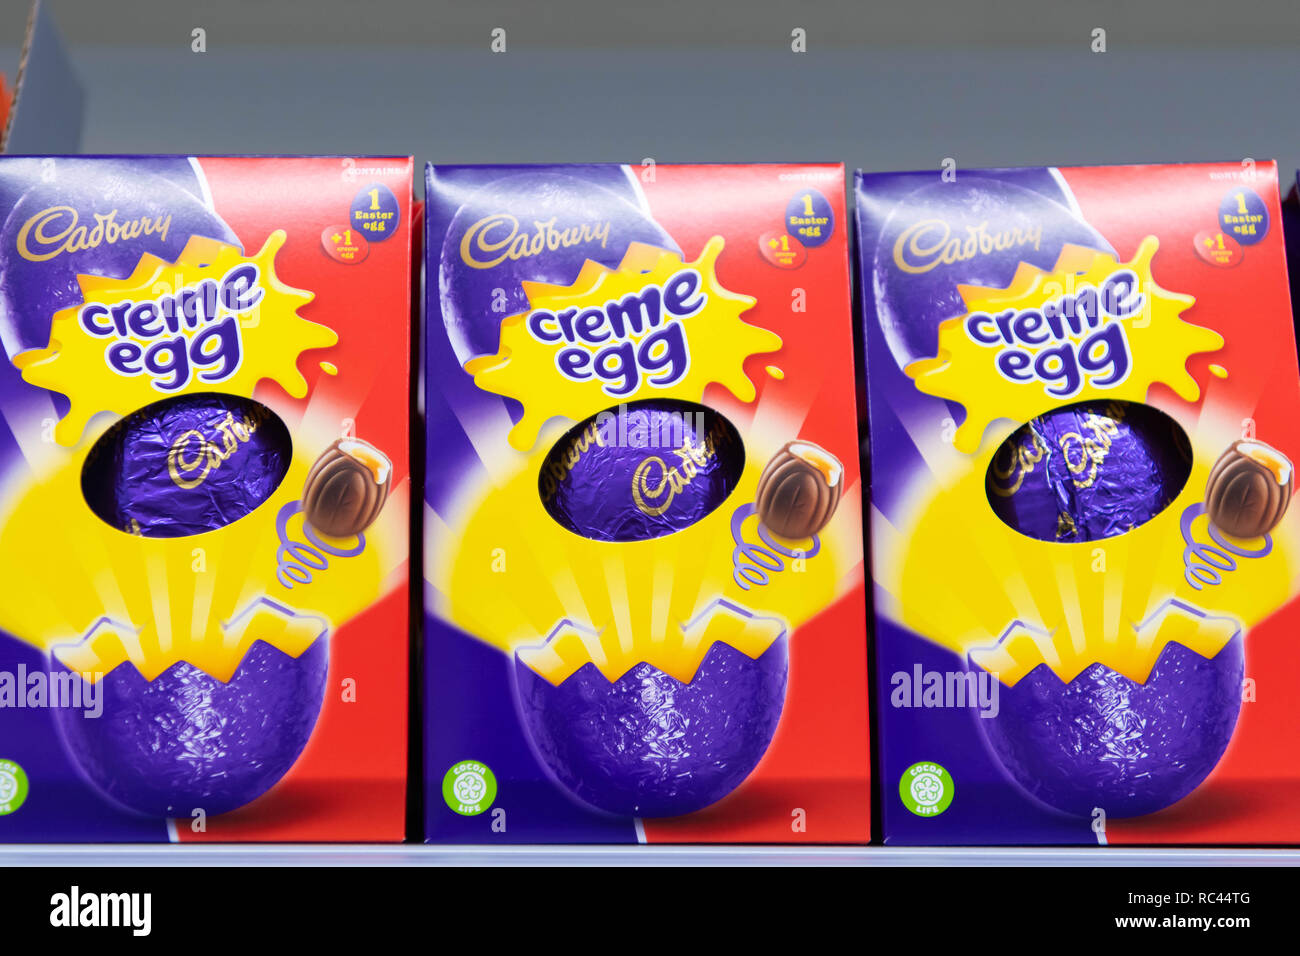 Cadbury’s Creme Egg Easter eggs on sale in a supermarket shop in the UK. Stock Photo